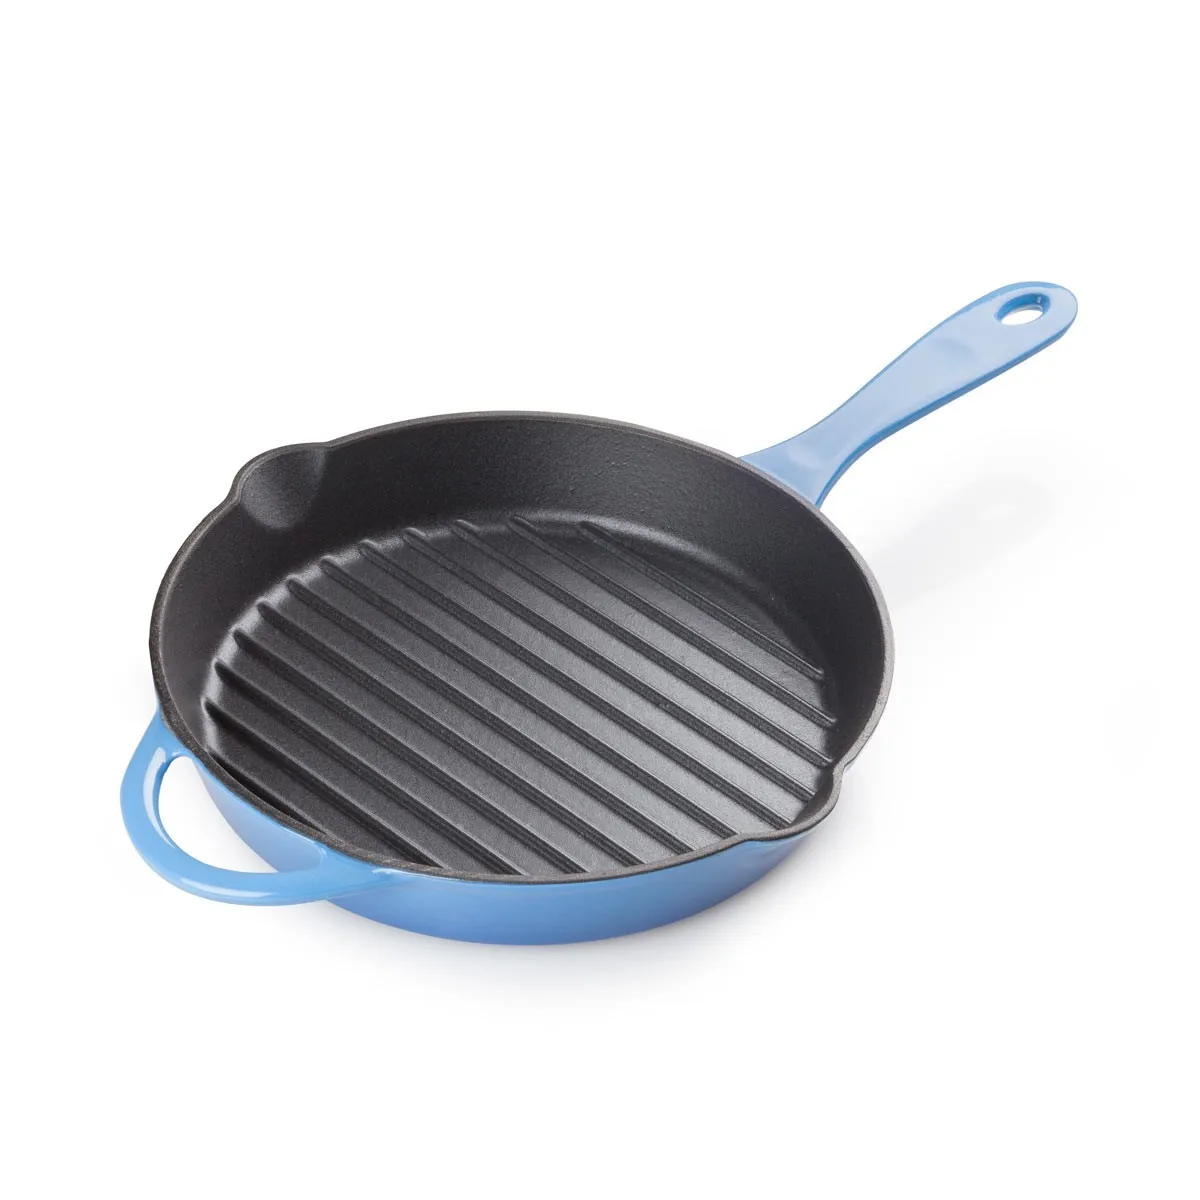 

Low Moq Round Bbq Steak Cookware Pans Non-Stick Frying Pan 26cm Enameled Iron Cast Grill Pan With Long Handle